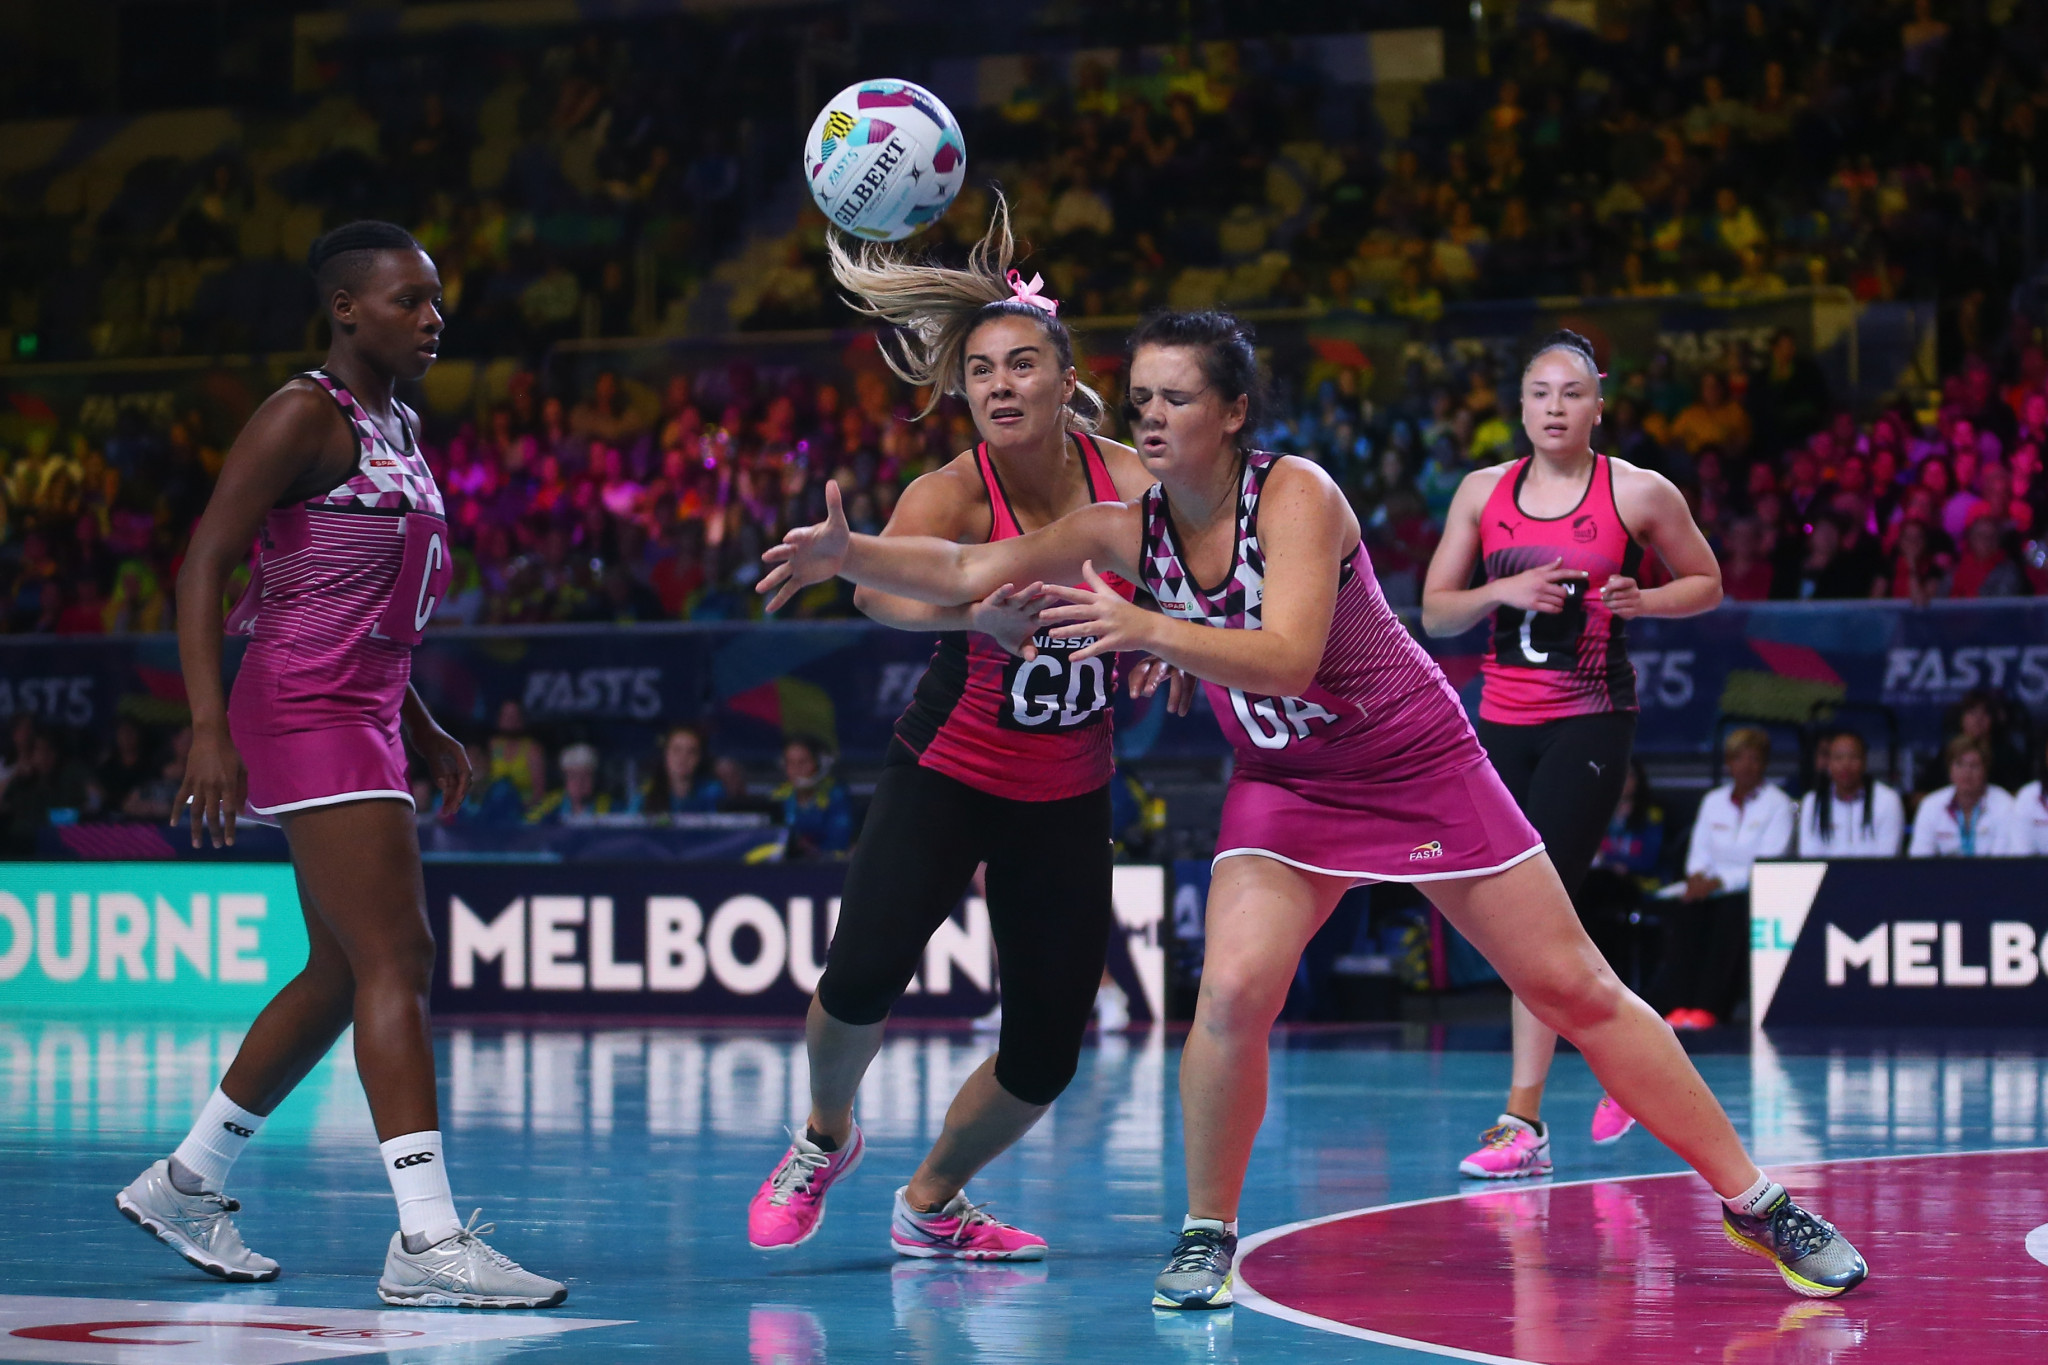 New Zealand won all three of their games on the first day of the Fast5 Netball World Series in Melbourne, including a 39-36 victory over South Africa ©Getty Images